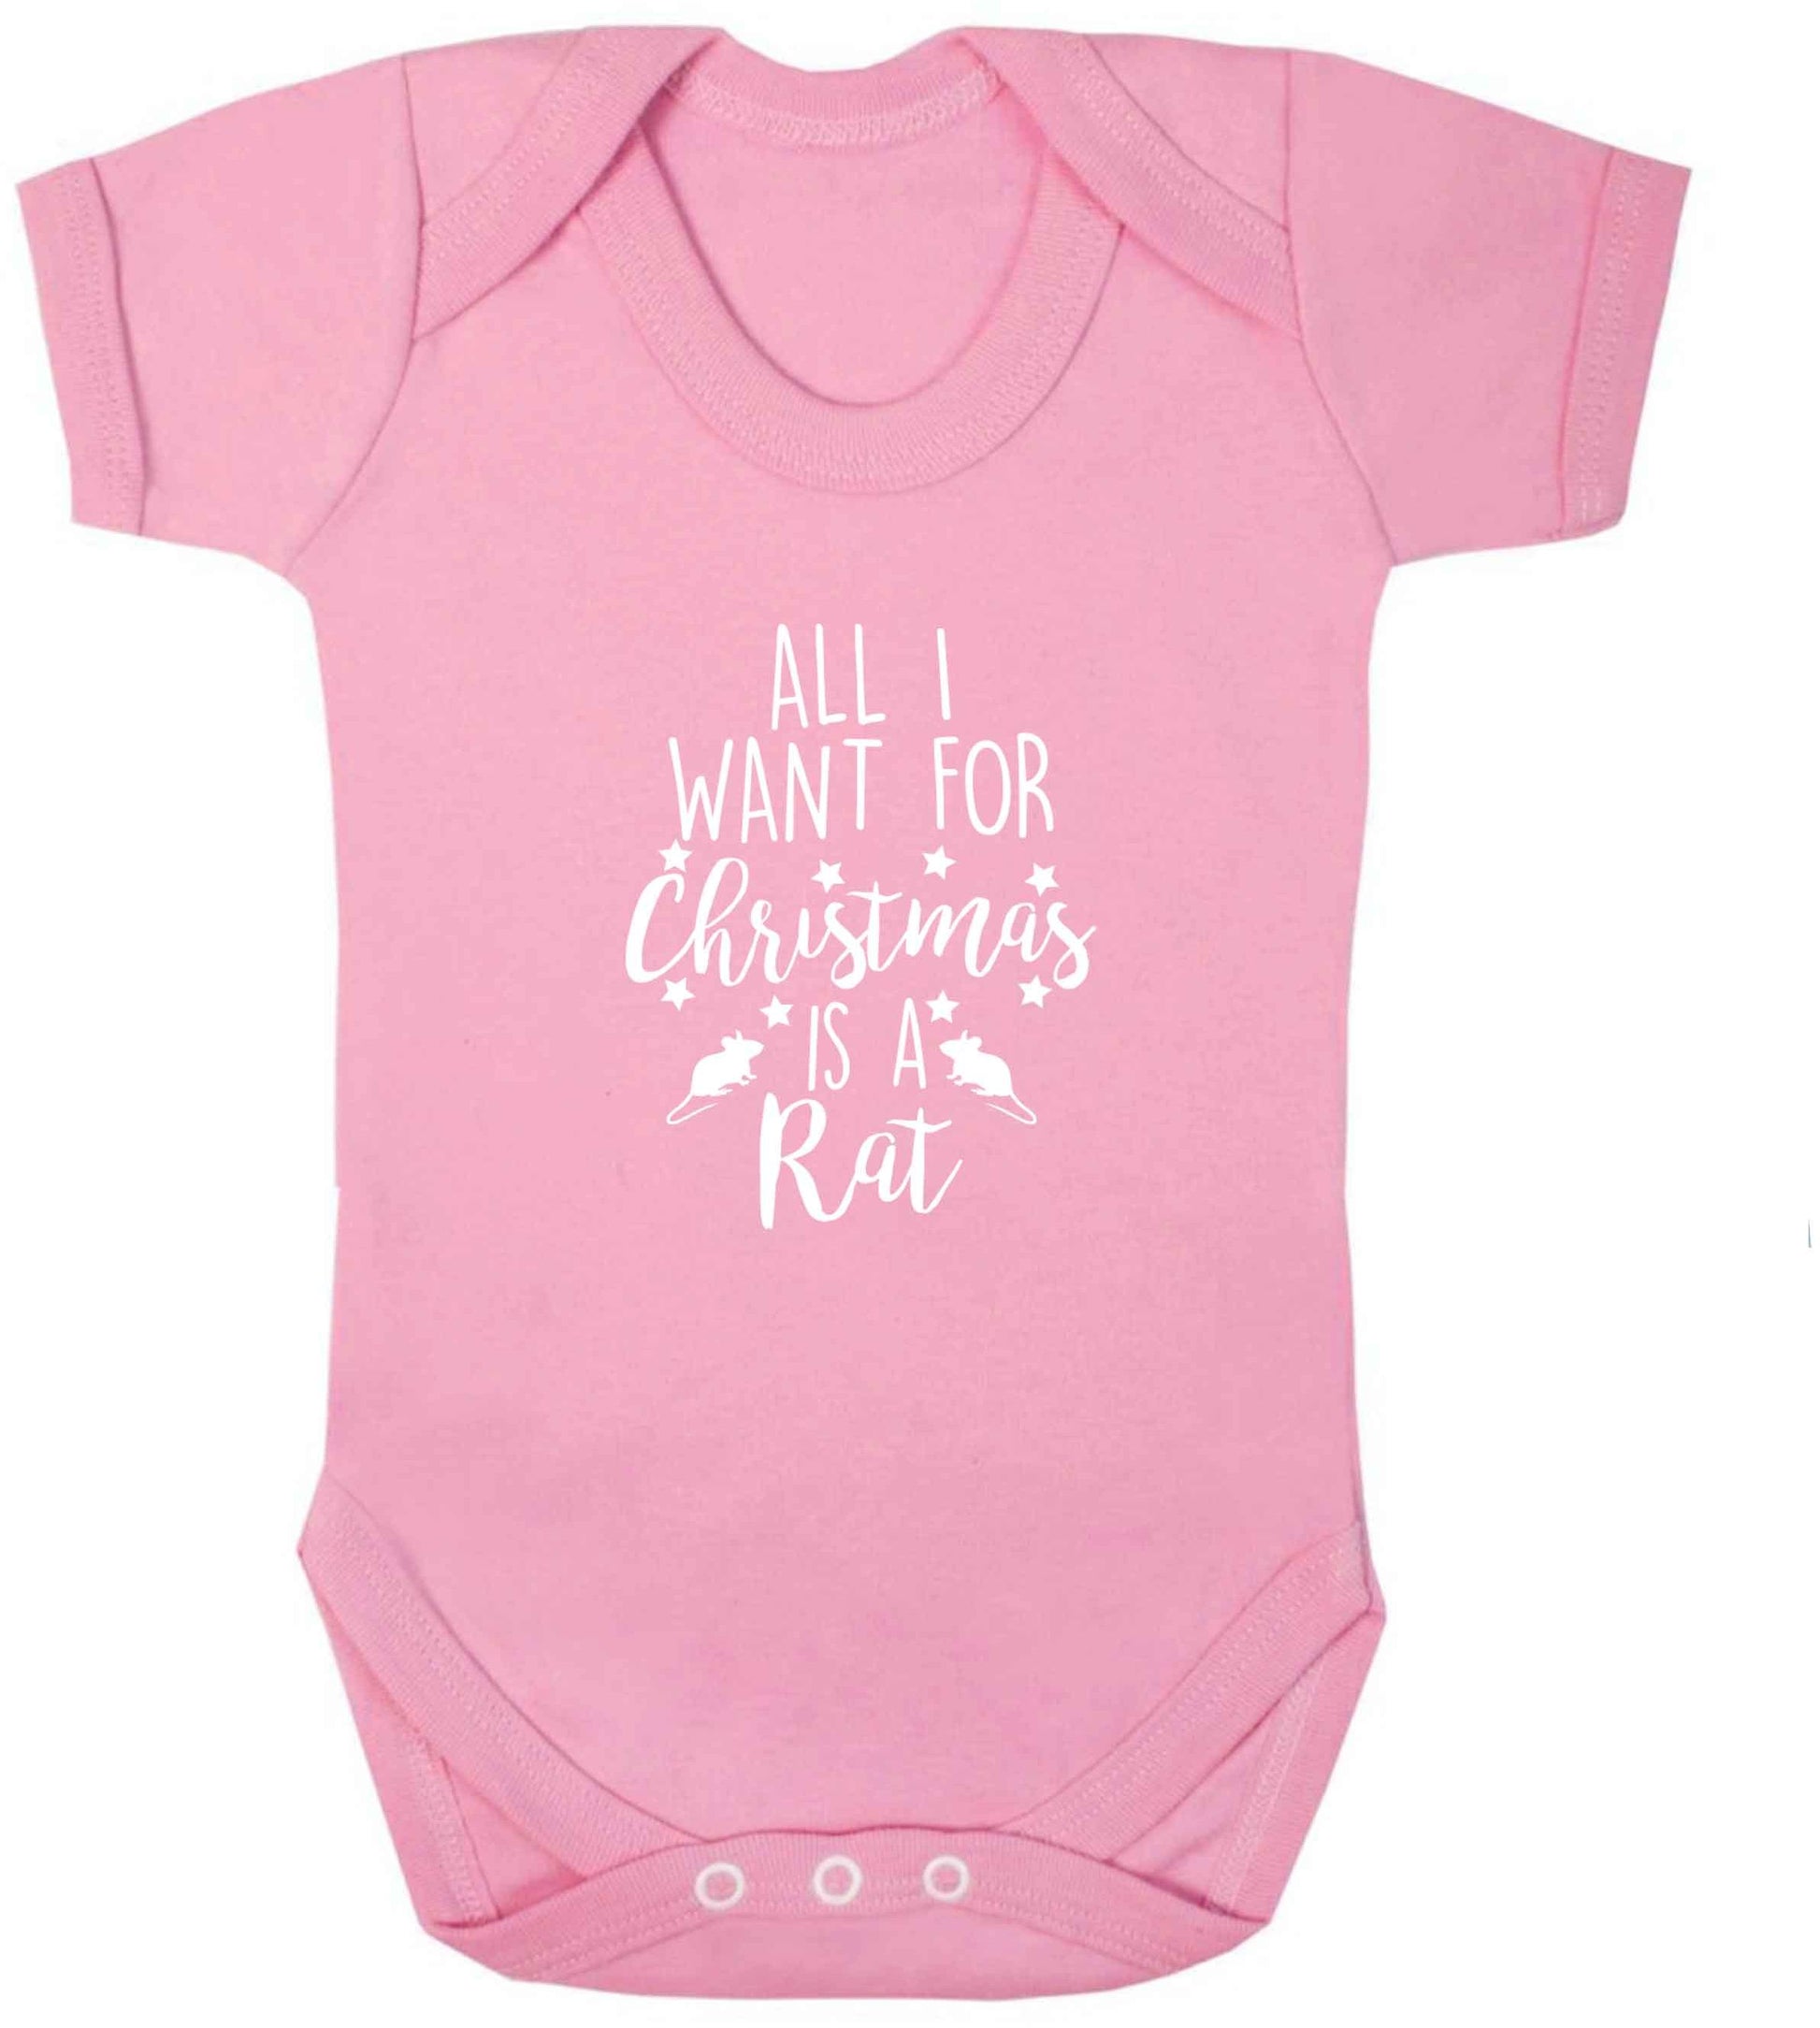 All I want for Christmas is a rat baby vest pale pink 18-24 months